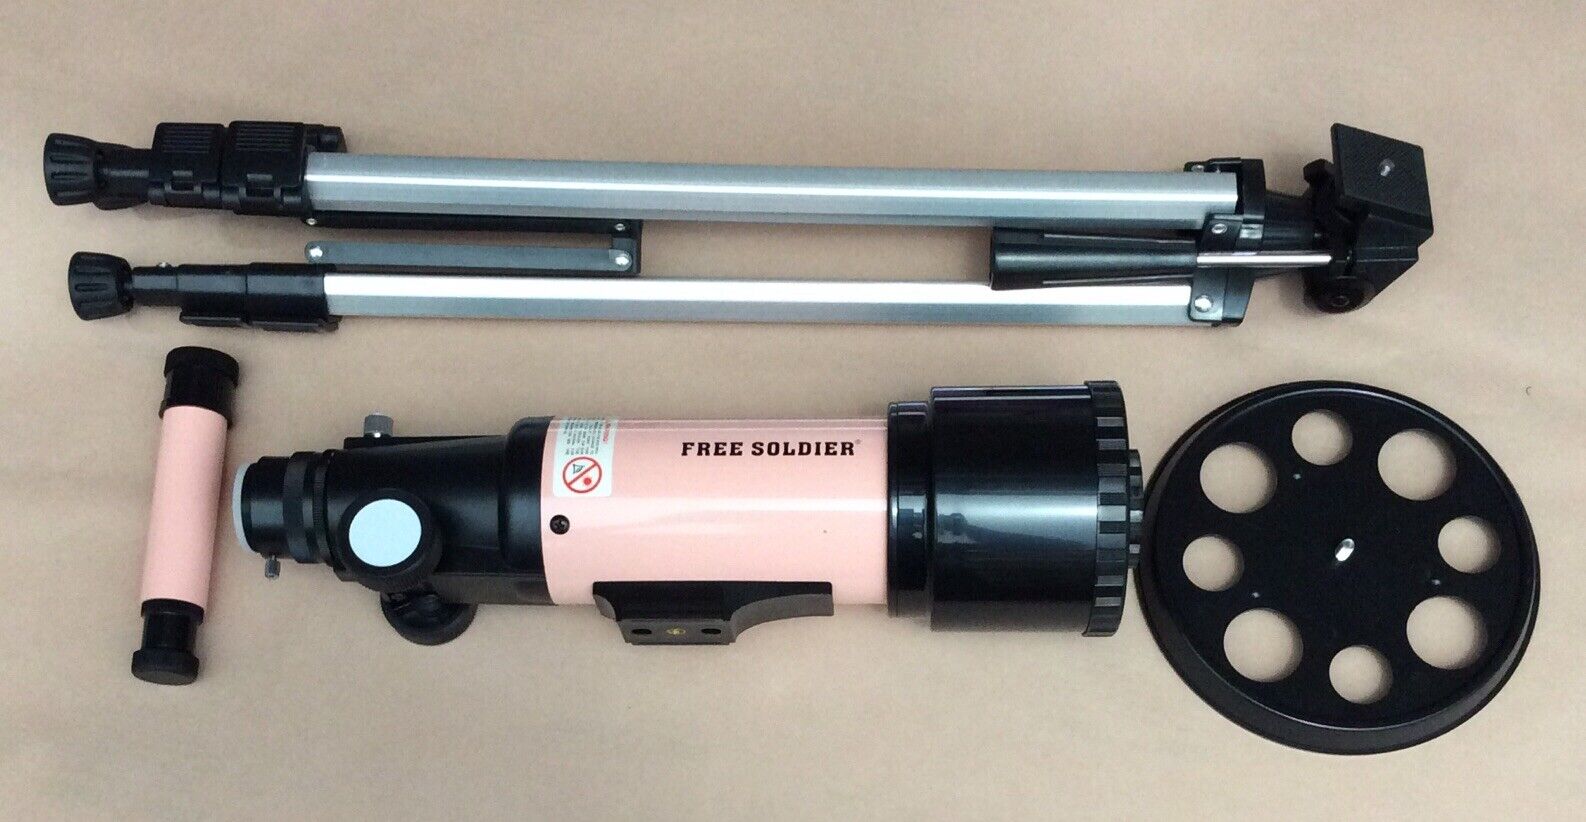 Free Soldier 40070 Astronomical Refractor Telescope Kit, Pink